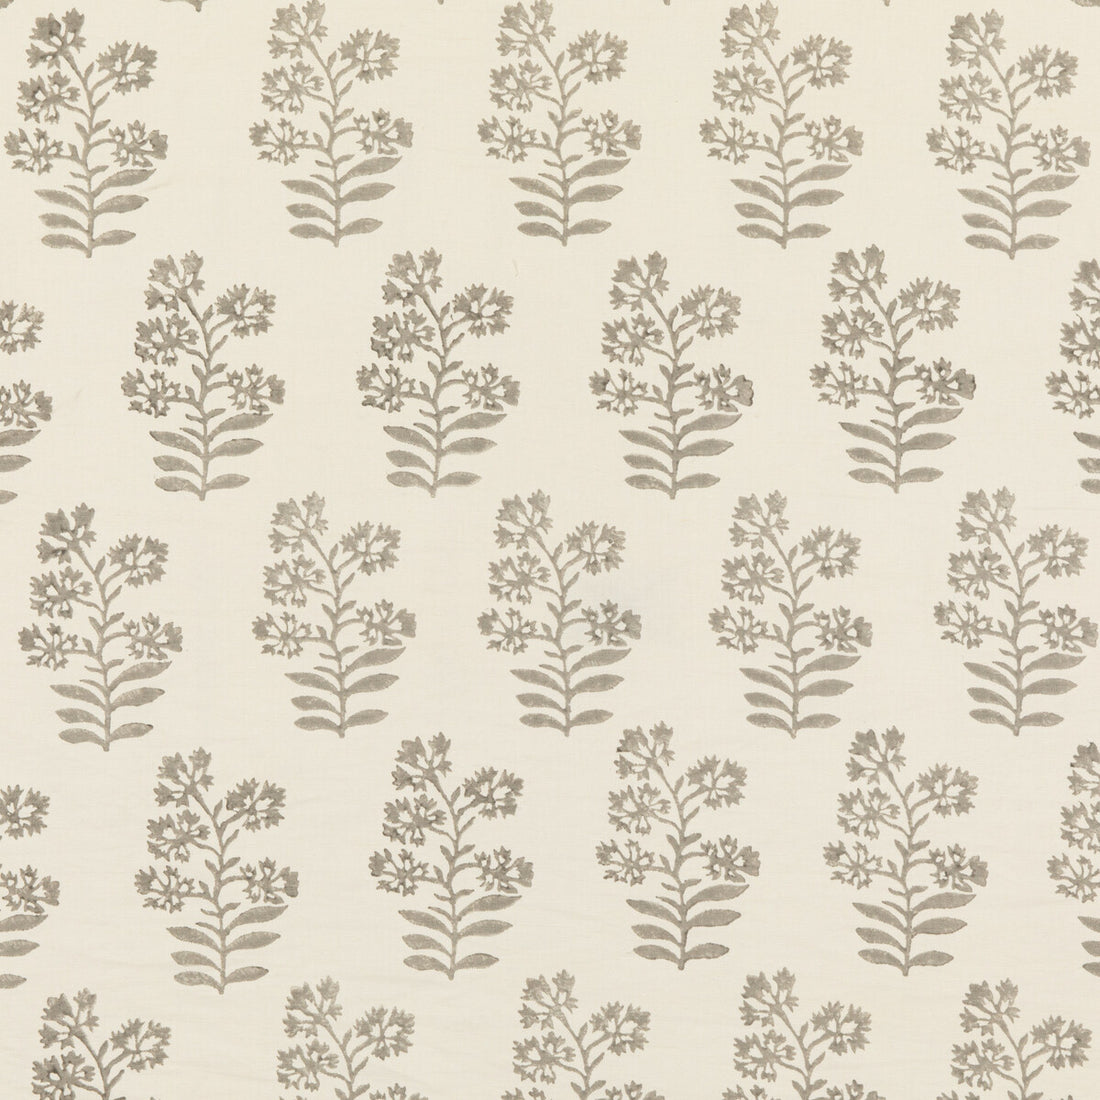 Wild Flower fabric in stone color - pattern PP50483.4.0 - by Baker Lifestyle in the Block Party collection